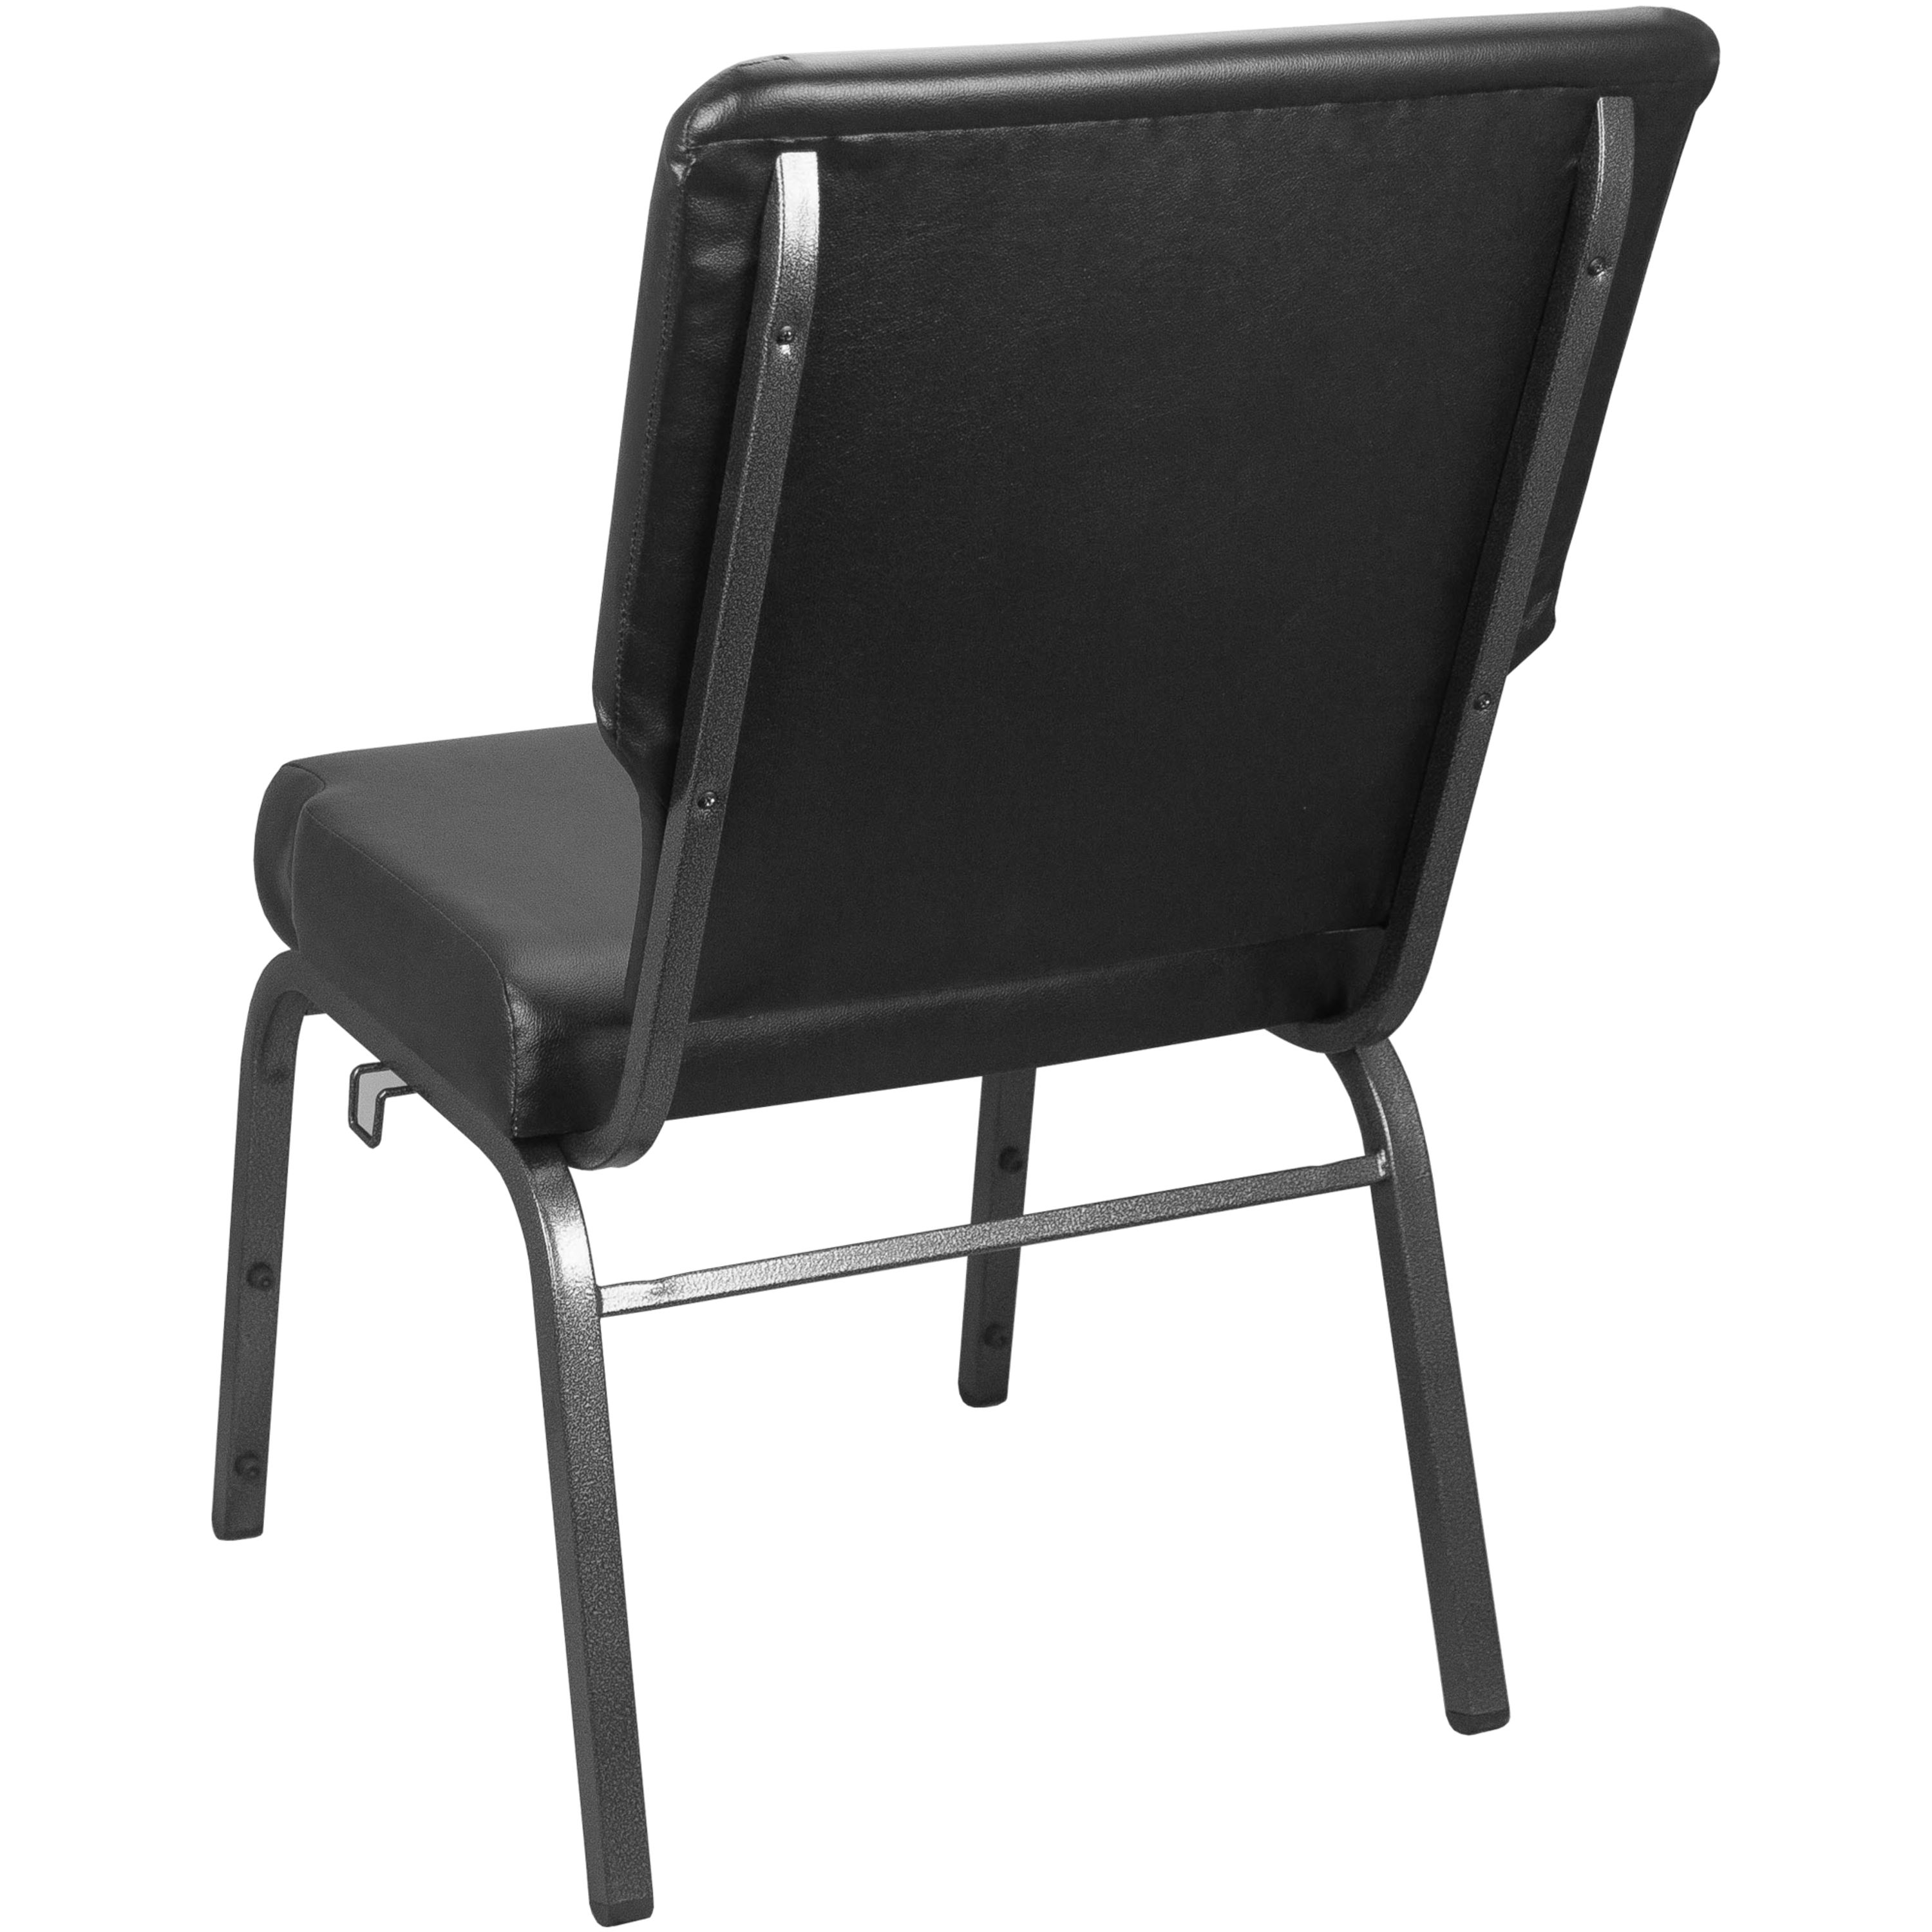 Vinyl Church Chair 20.5in. ADVG-PCHT-VINYL- – Stack Chairs 4 Less